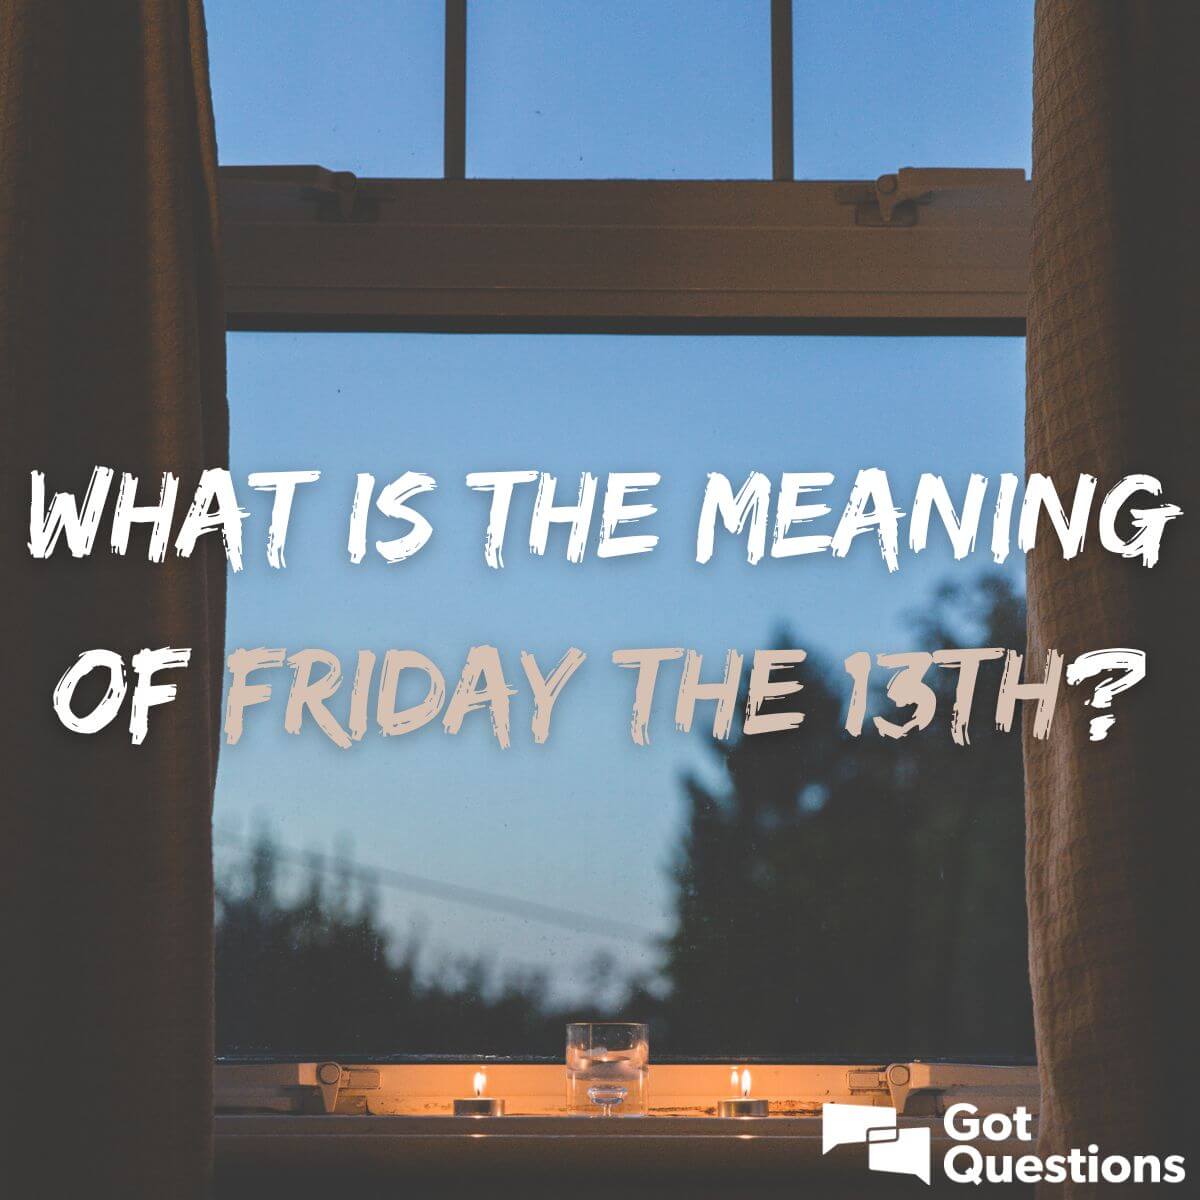 What is the meaning of Friday the 13th?